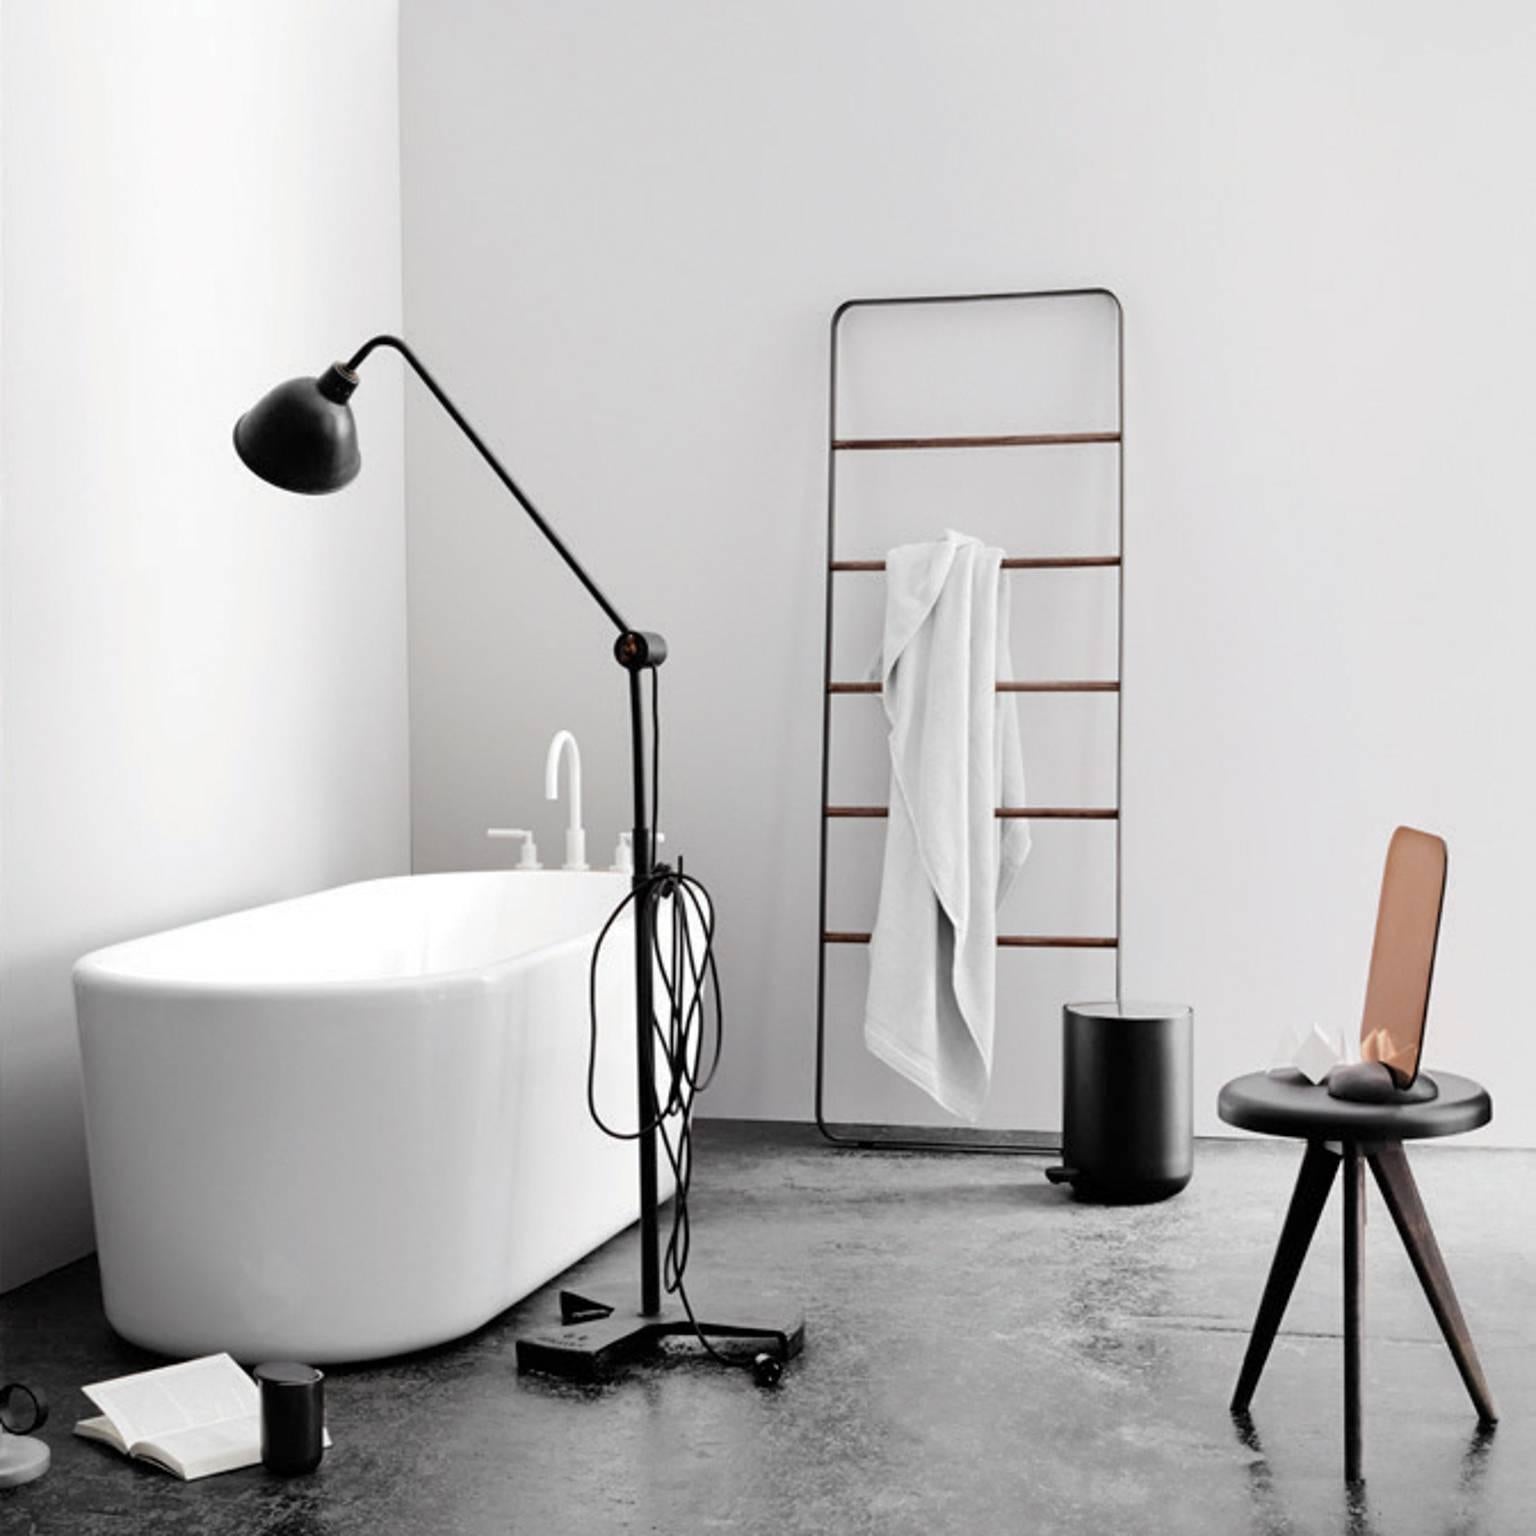 The towel ladder is an informal and flexible piece of furniture made for storing towels and accessories in the bathroom, clothes in the bedroom or scarves and coats in the hallway. It’s easy to move around the house and the leather strap at the top